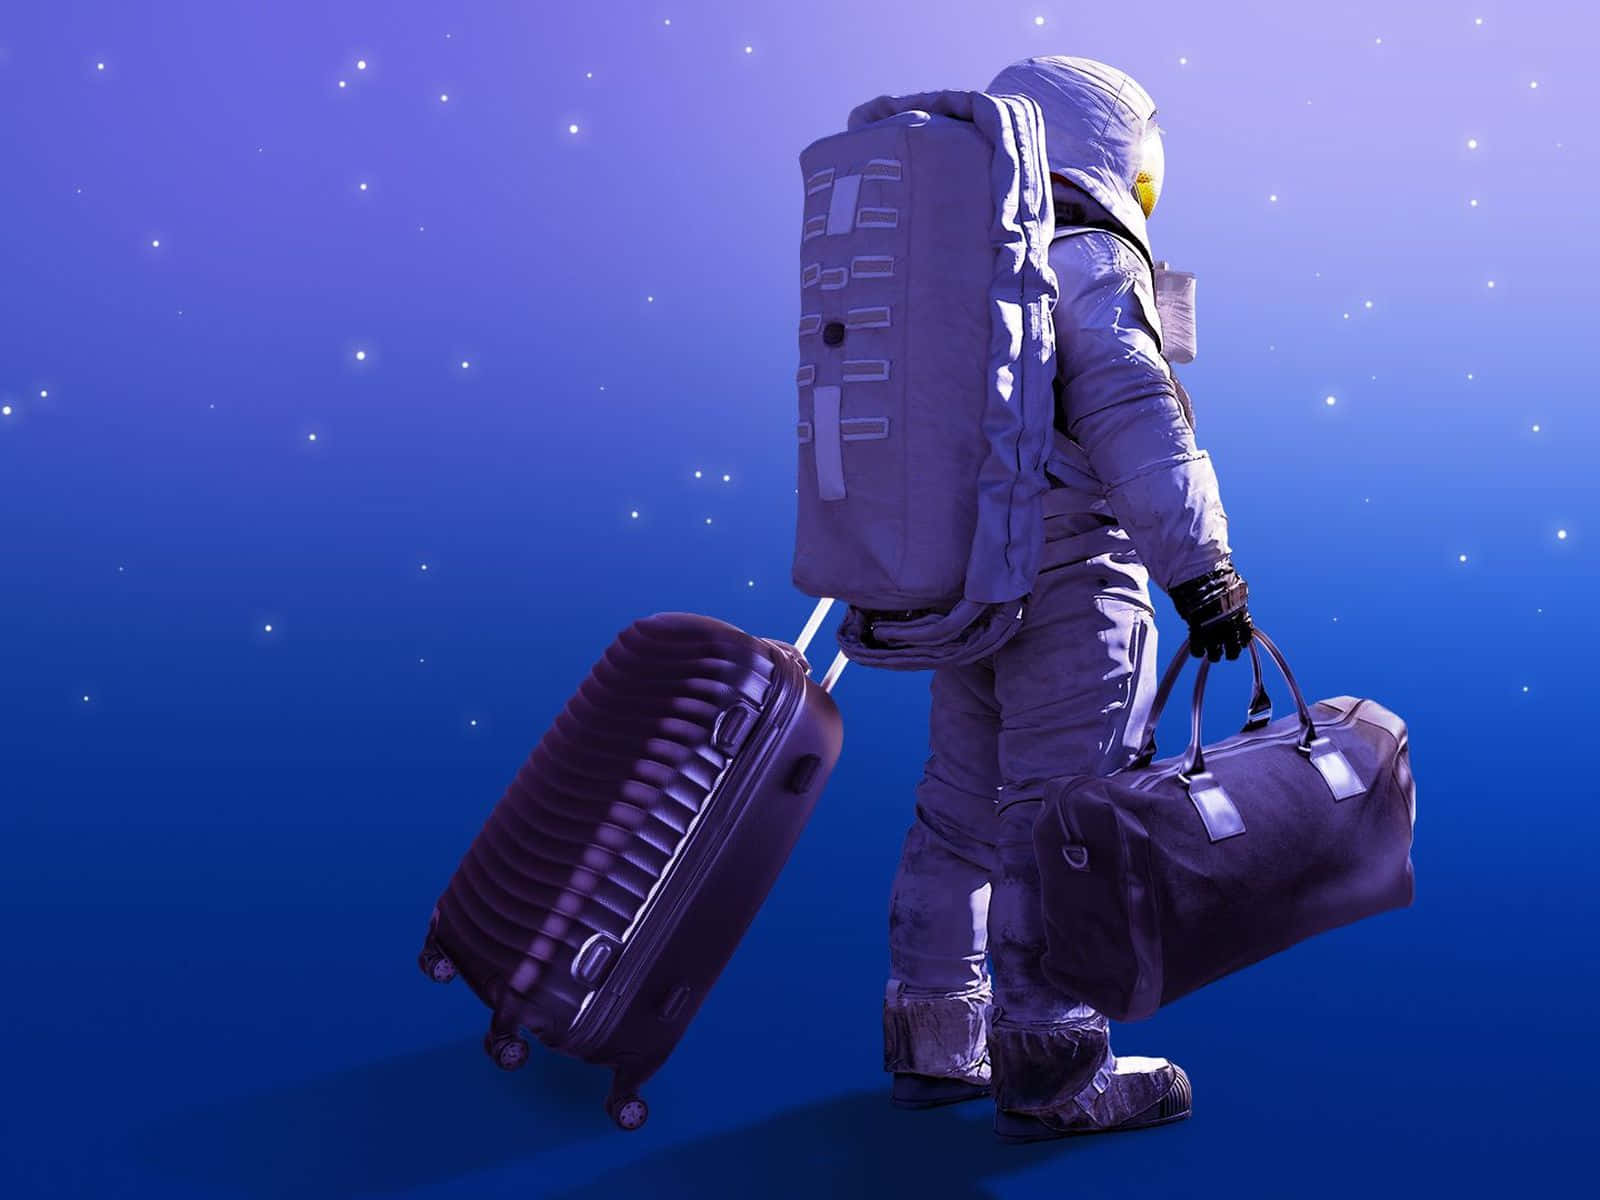 Pack Just the Essentials in this Stylish Purple Travel Bag Wallpaper